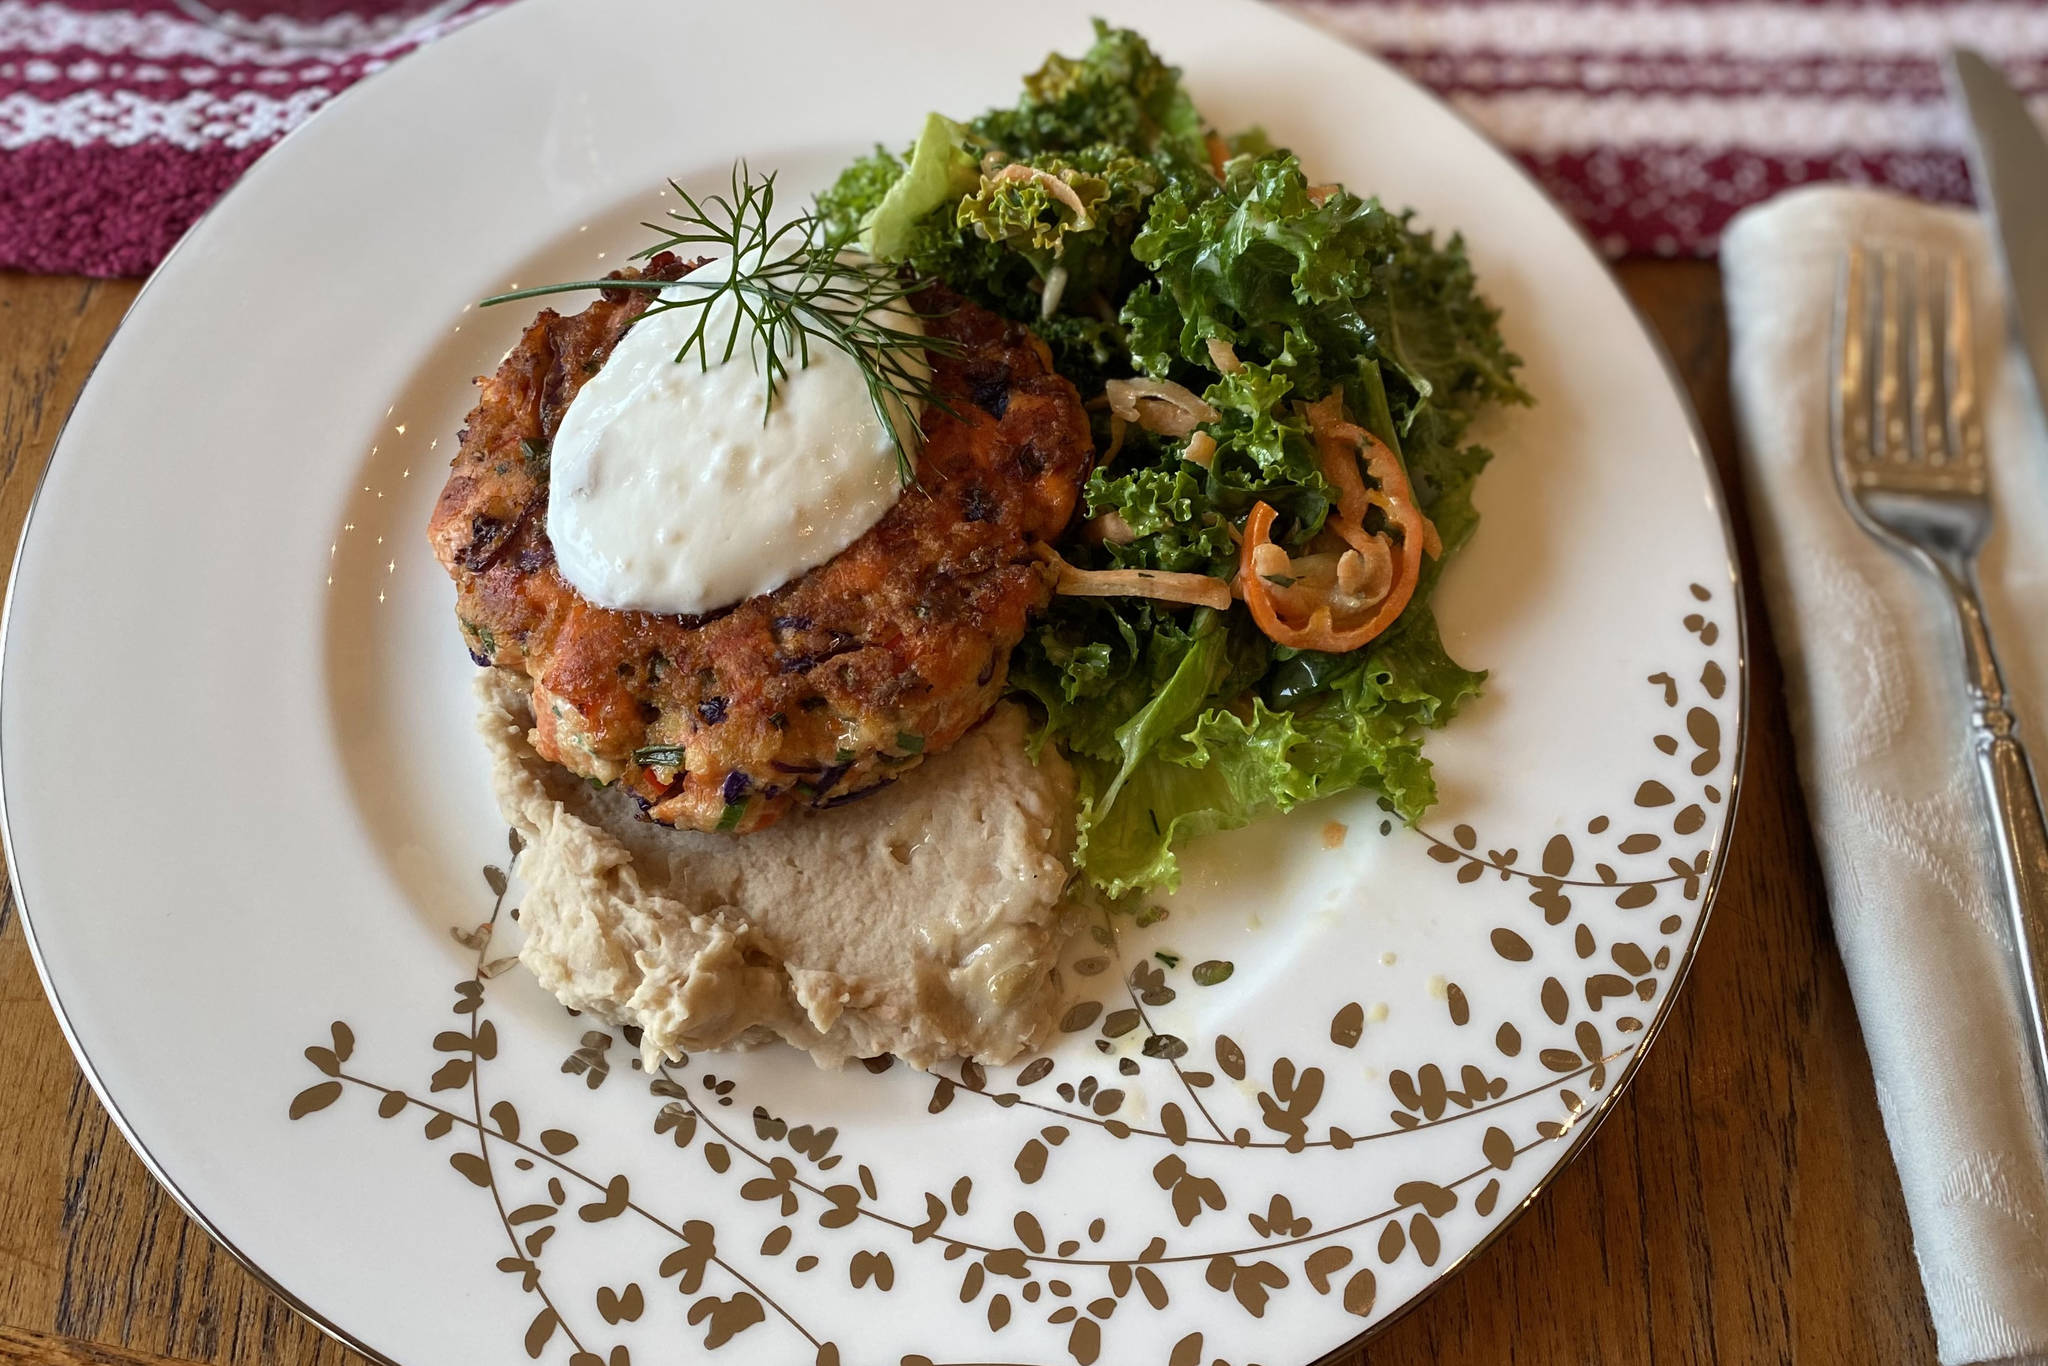 Bell pepper, cabbage and onions add flavor and texture to this salmon cake recipe. P(Photo by Tress Dale/Peninsula Clarion)